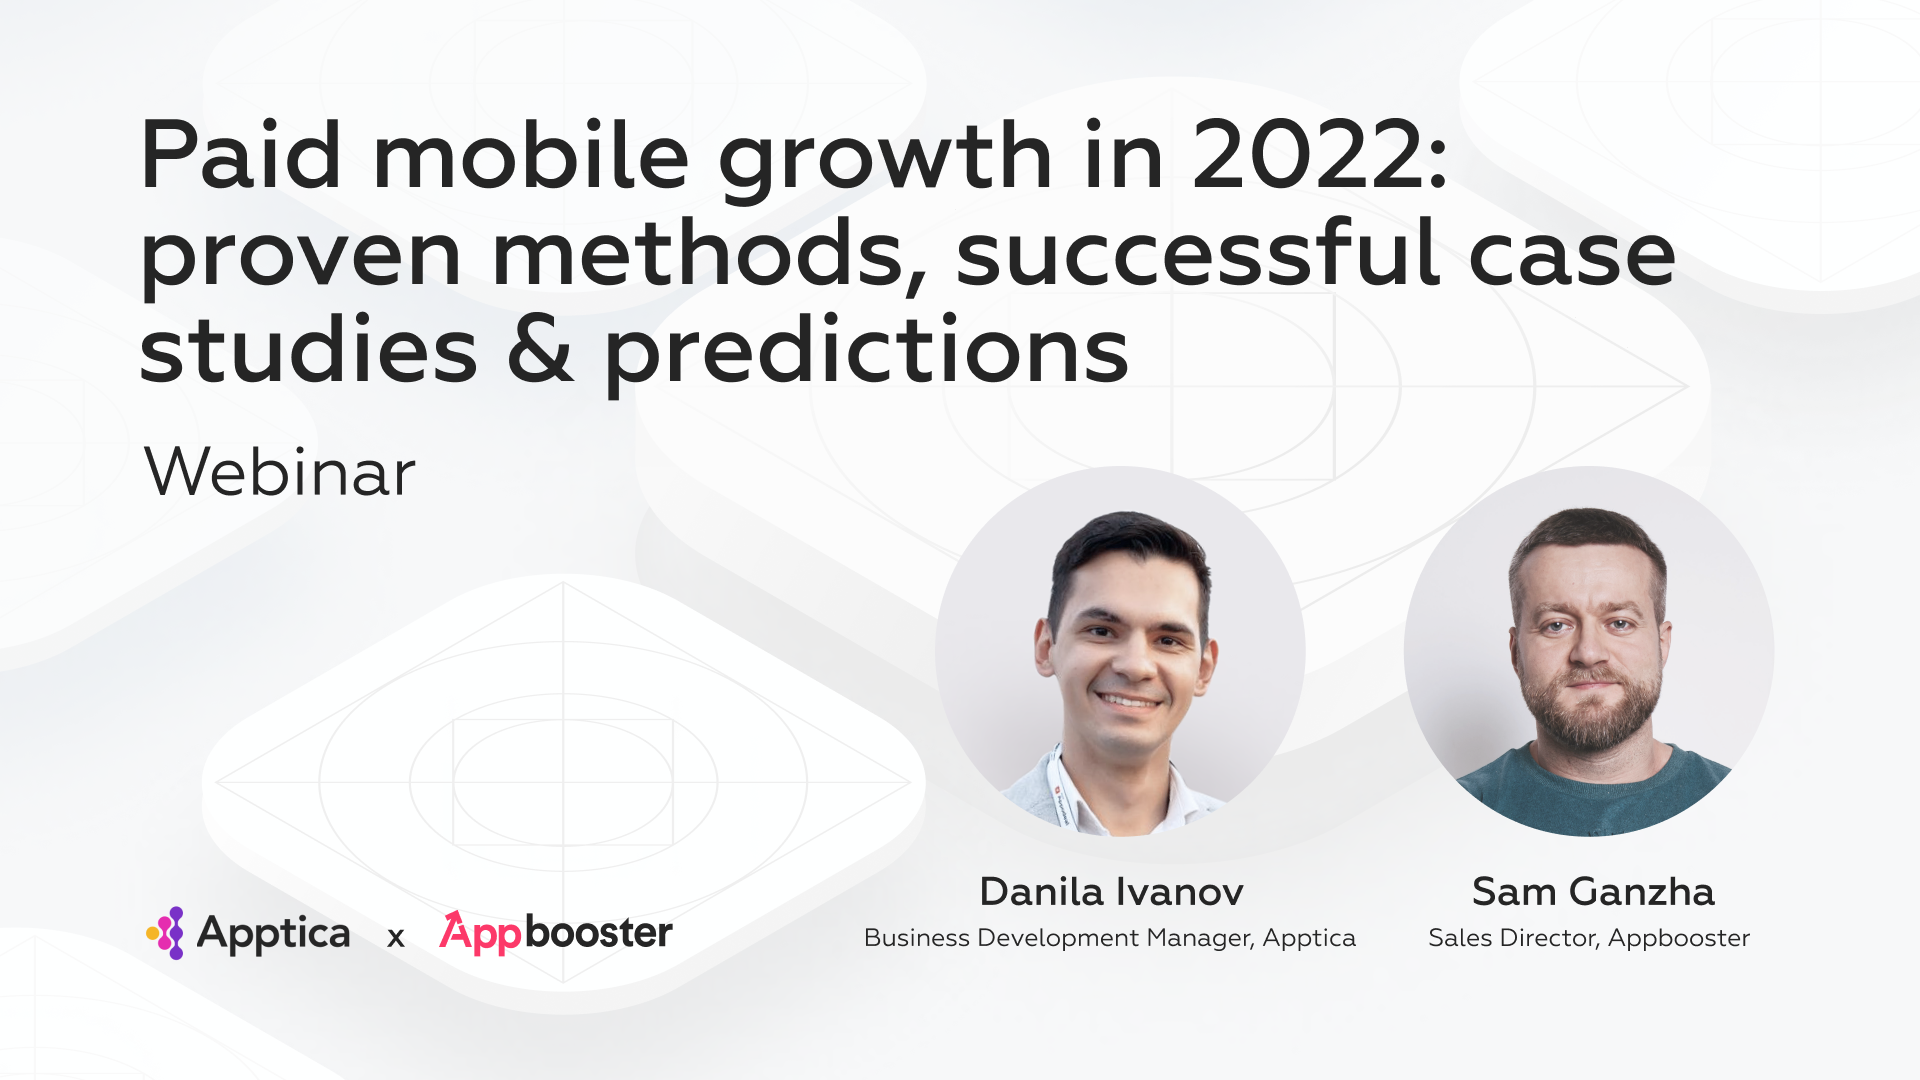 Paid mobile growth in 2022: proven methods, successful case studies & predictions